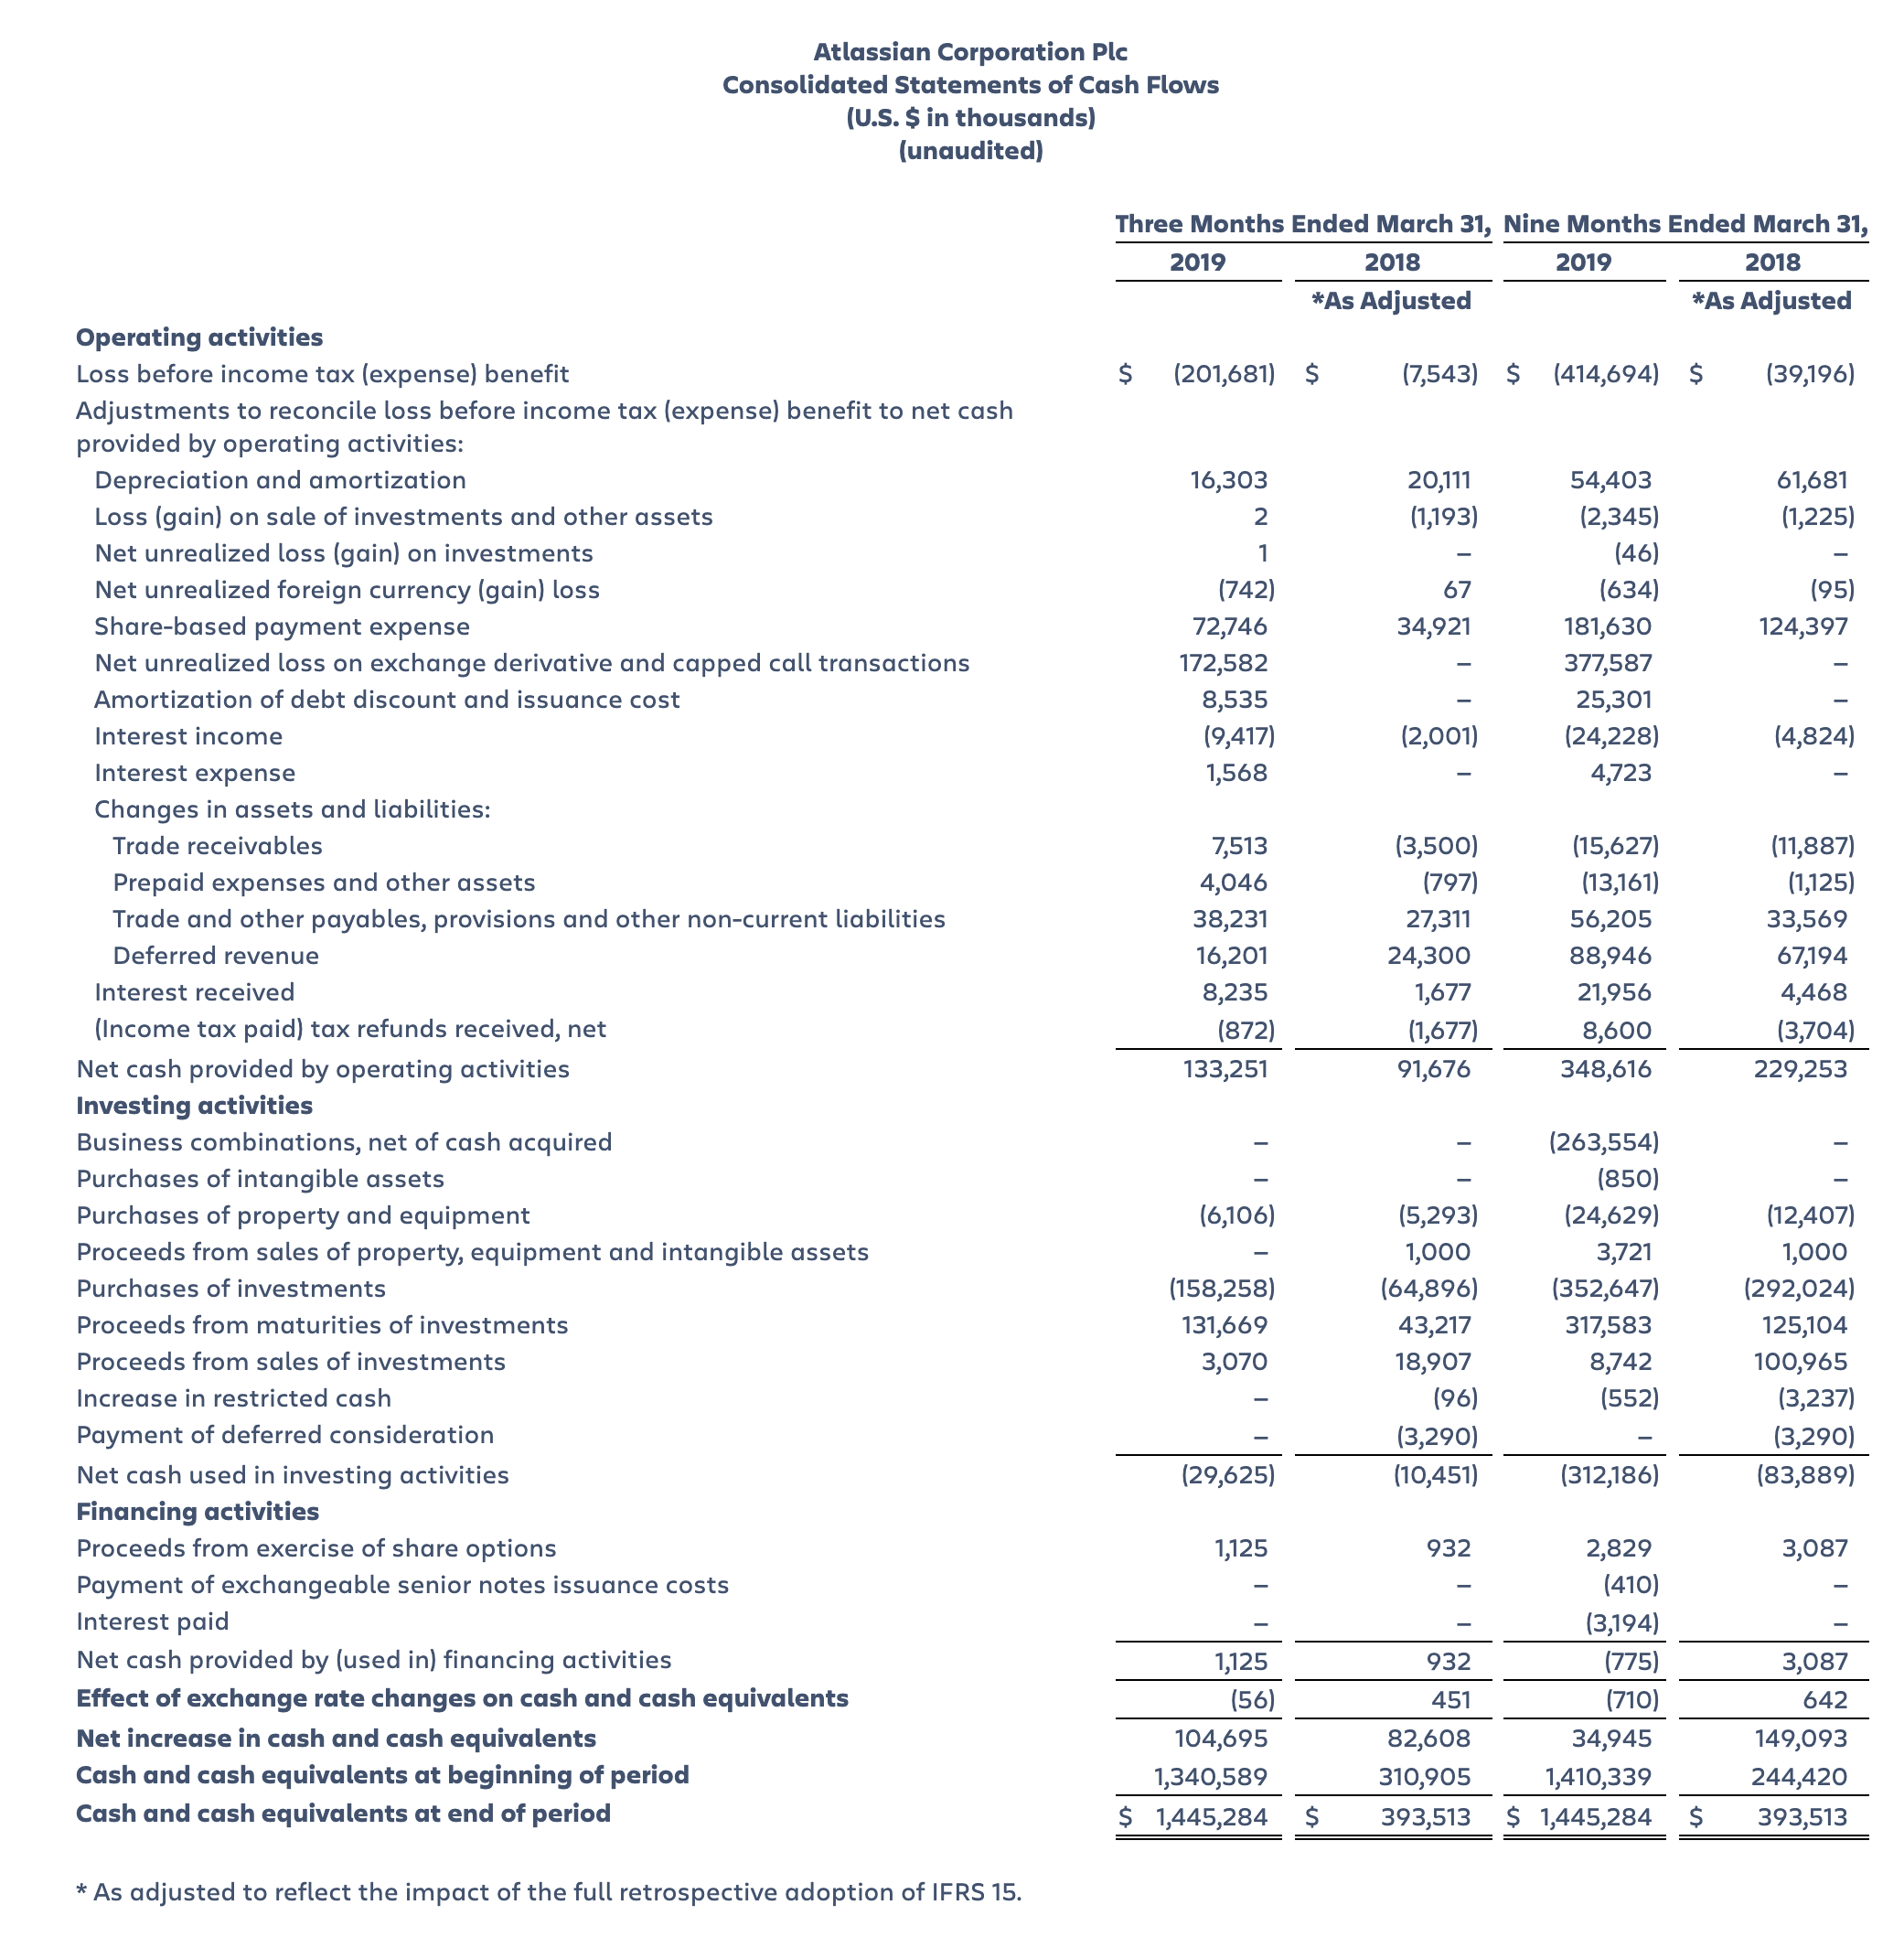 Atlassian Corp Plc Consolidated Statements of Cash Flow